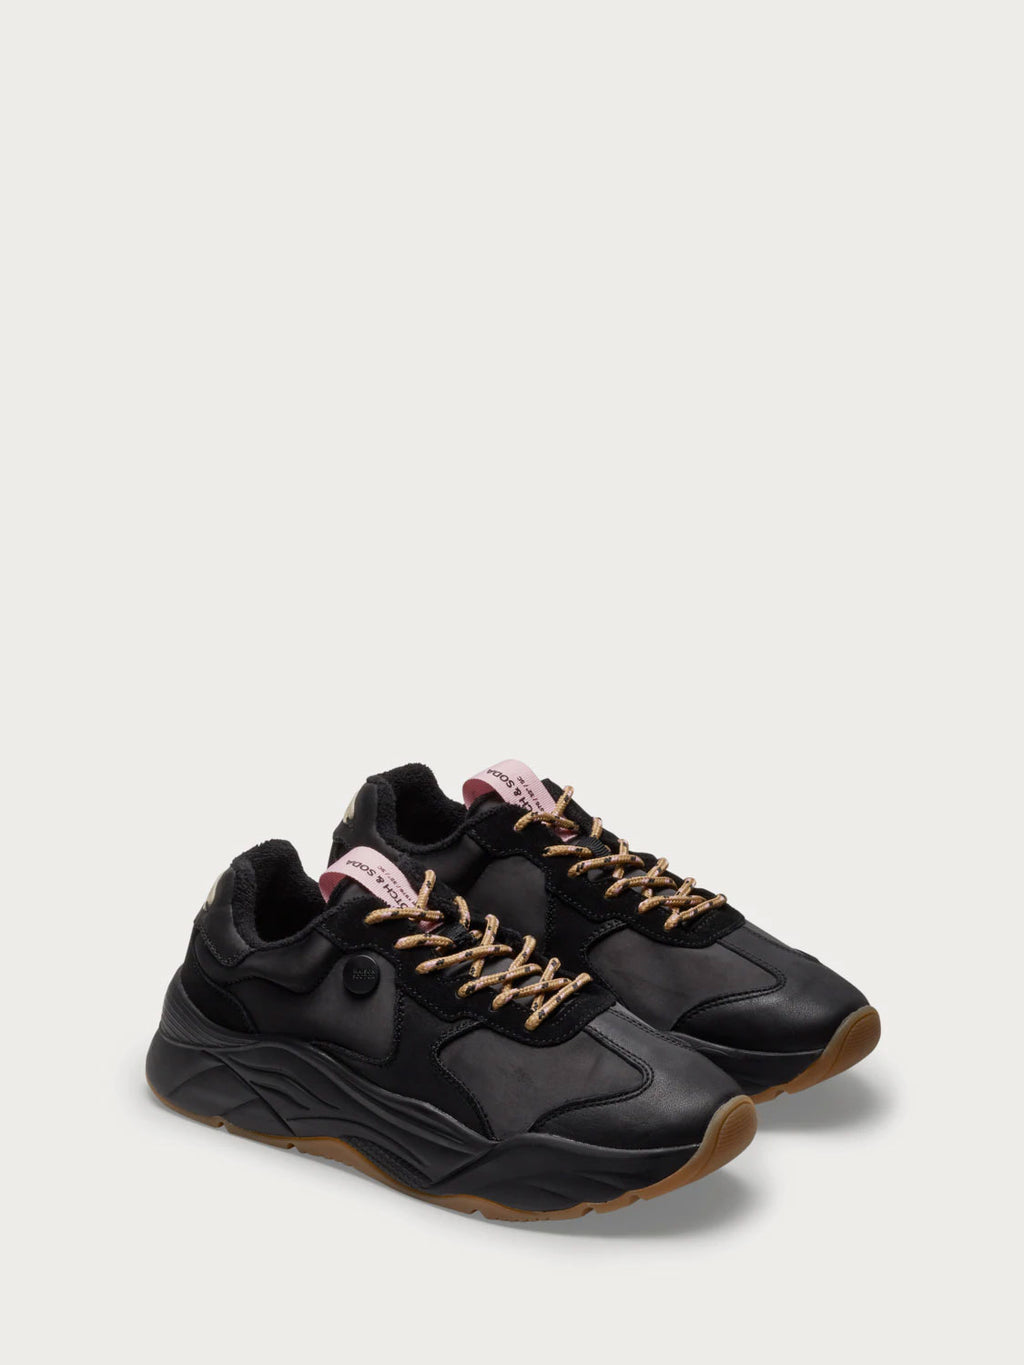 Celest – Chunky Sneakers